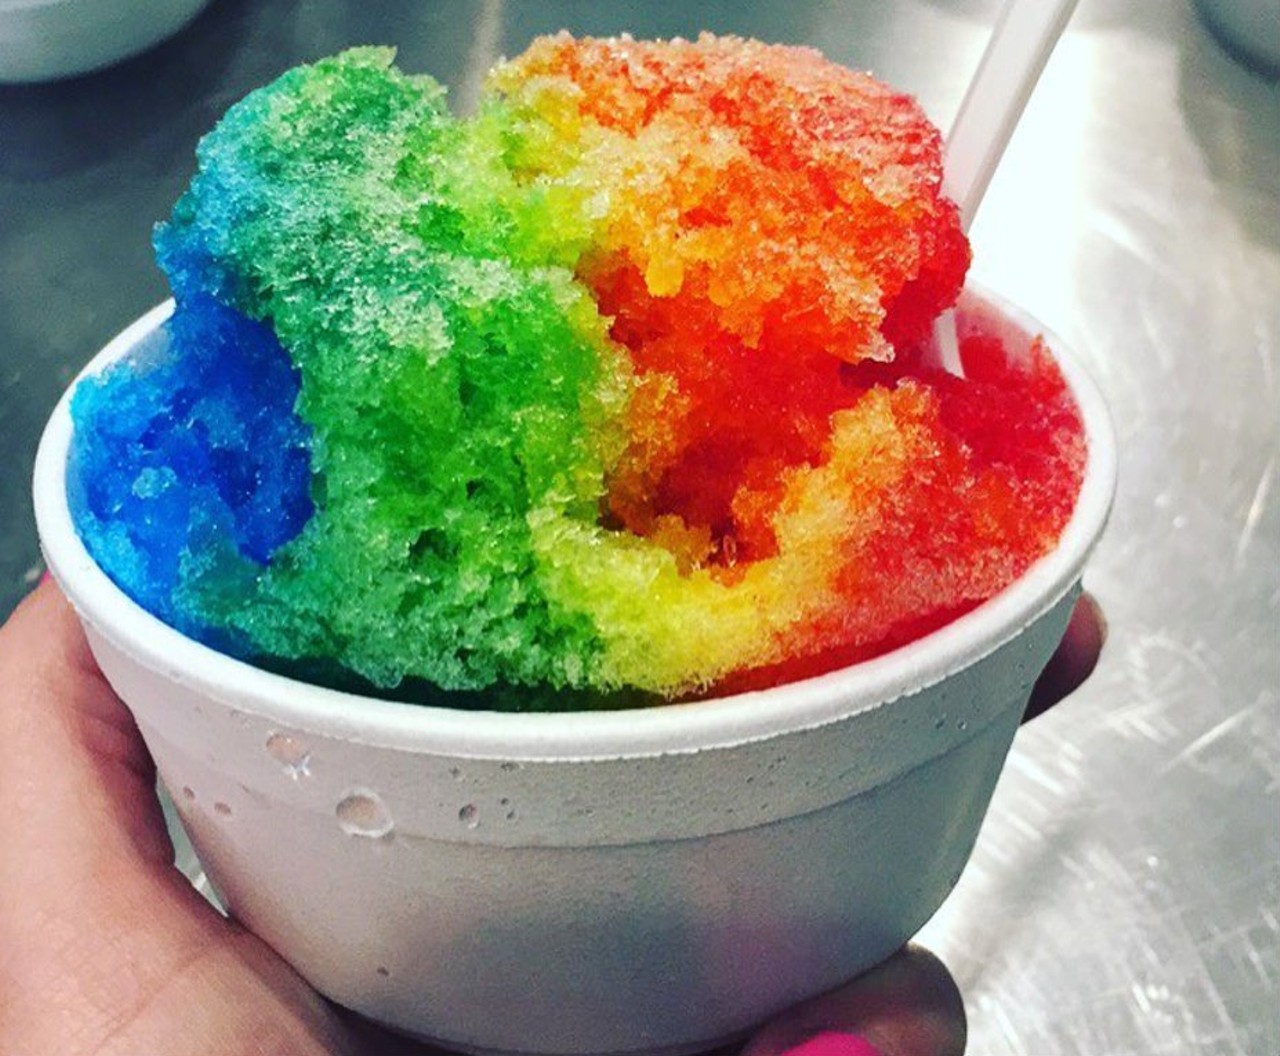 How Sweet Is This - The Itsy Bitsy Candy Shoppe
804 De Mun Ave, Clayton, MO 63105
Making a trip to Forest Park or the Saint Louis Zoo? How Sweet Is This is only a few blocks away. The shop&#146;s snow cones are a welcome treat for a hot summer day. Photo courtesy of Instagram / howsweetisthiscandyshoppe.